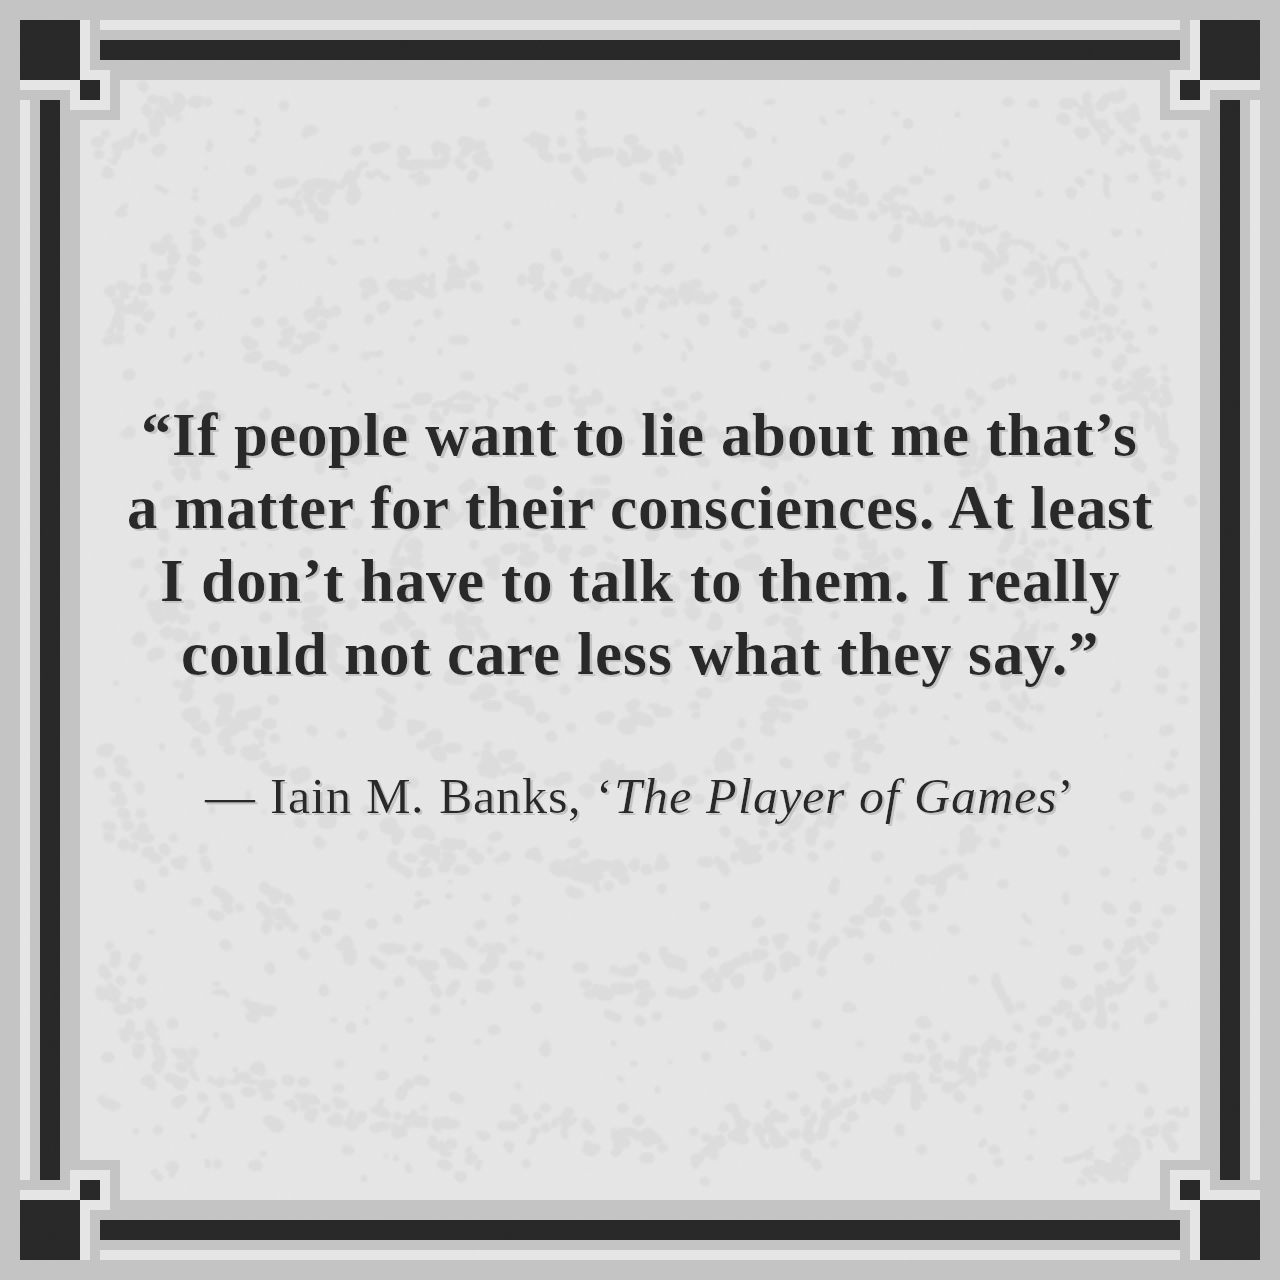 “If people want to lie about me that’s a matter for their consciences. At least I don’t have to talk to them. I really could not care less what they say.”

— Iain M. Banks, ‘The Player of Games’